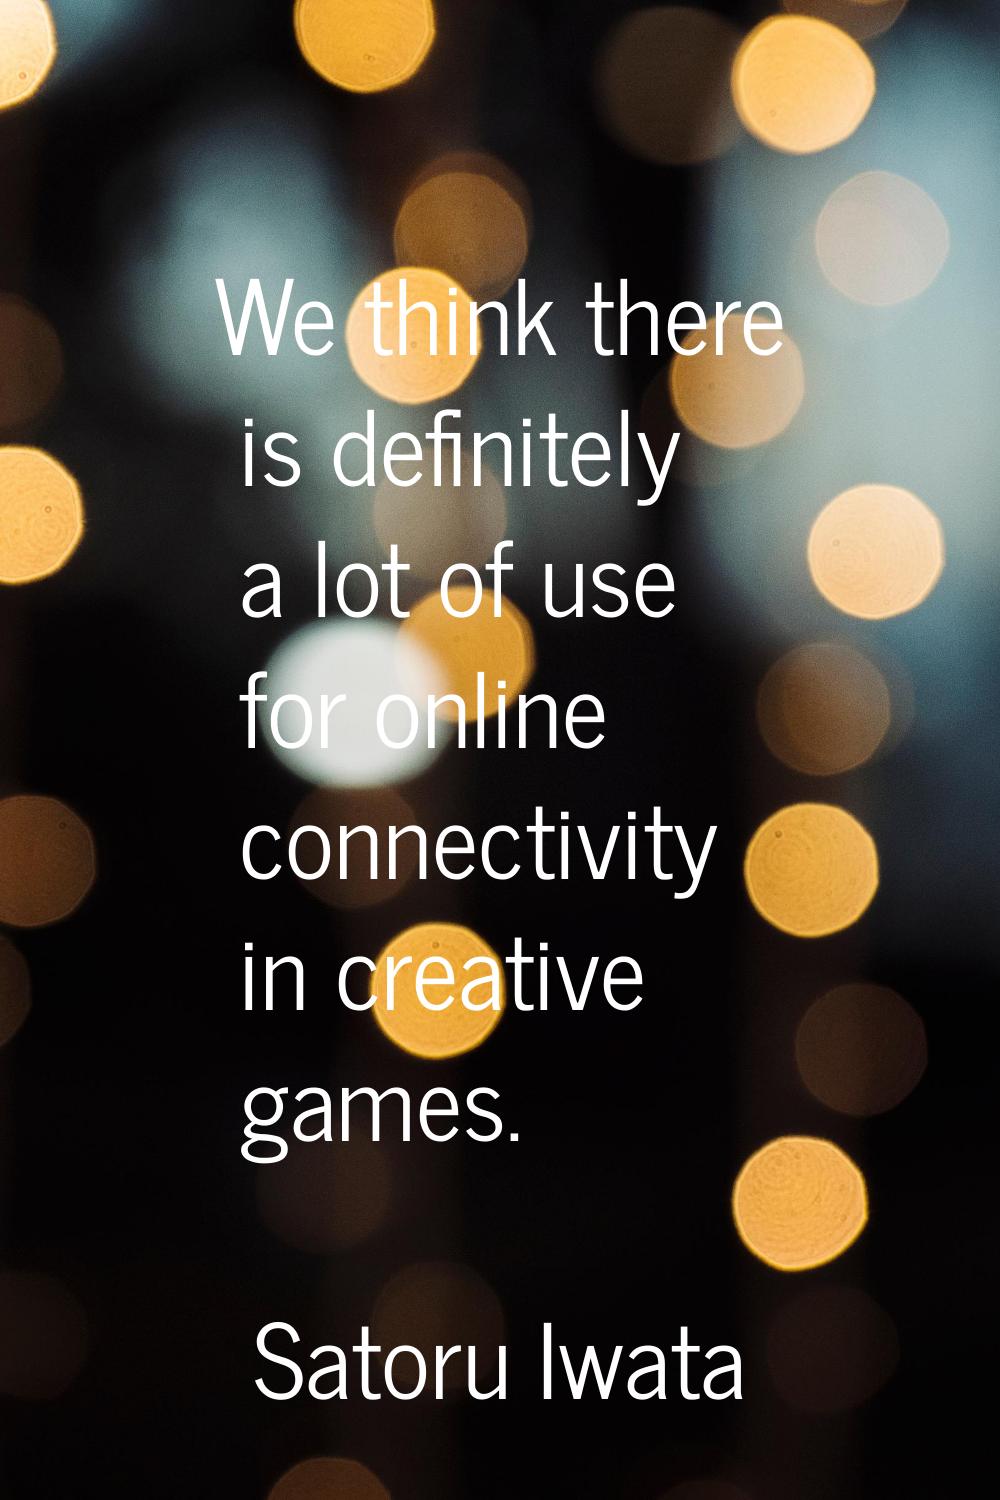 We think there is definitely a lot of use for online connectivity in creative games.